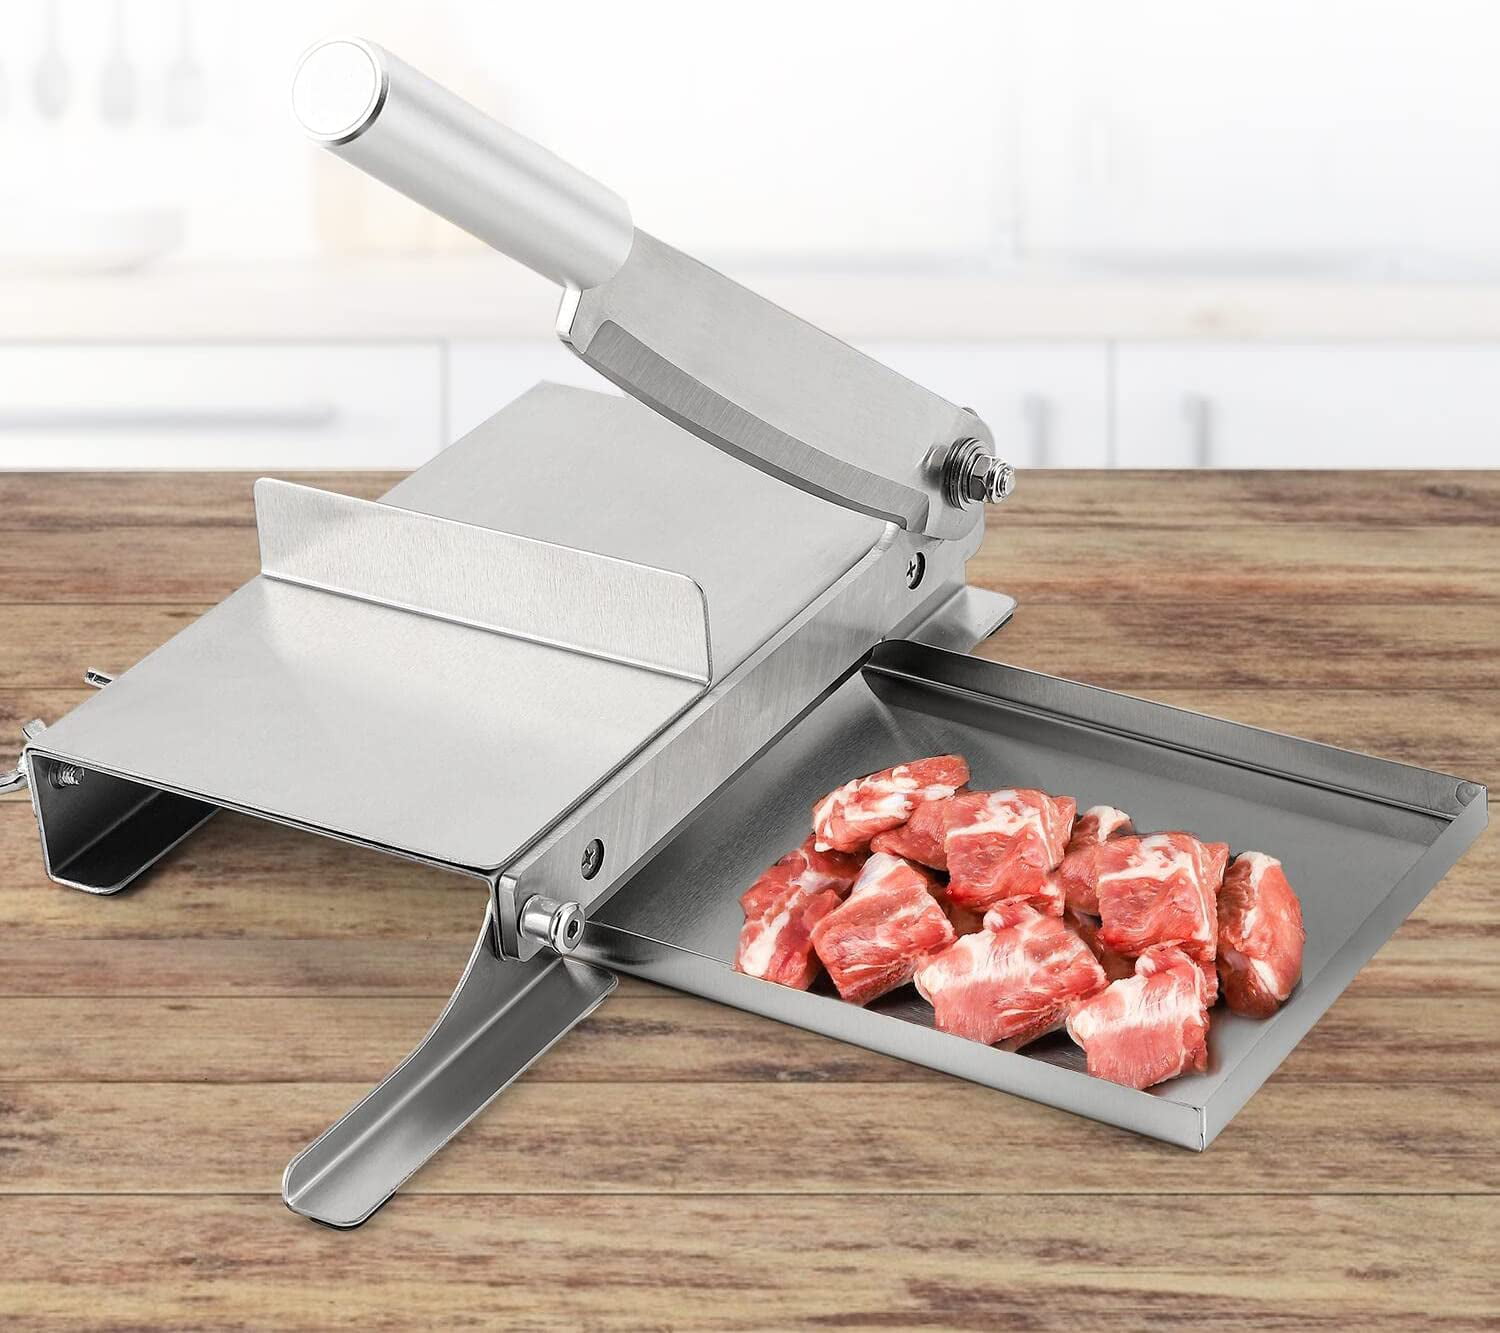 Home Kitchen Frozen Meat Slicer Manual Stainless Steel Food Cutter Slicing  Machine Automatic Meat Delivery Nonslip Handle